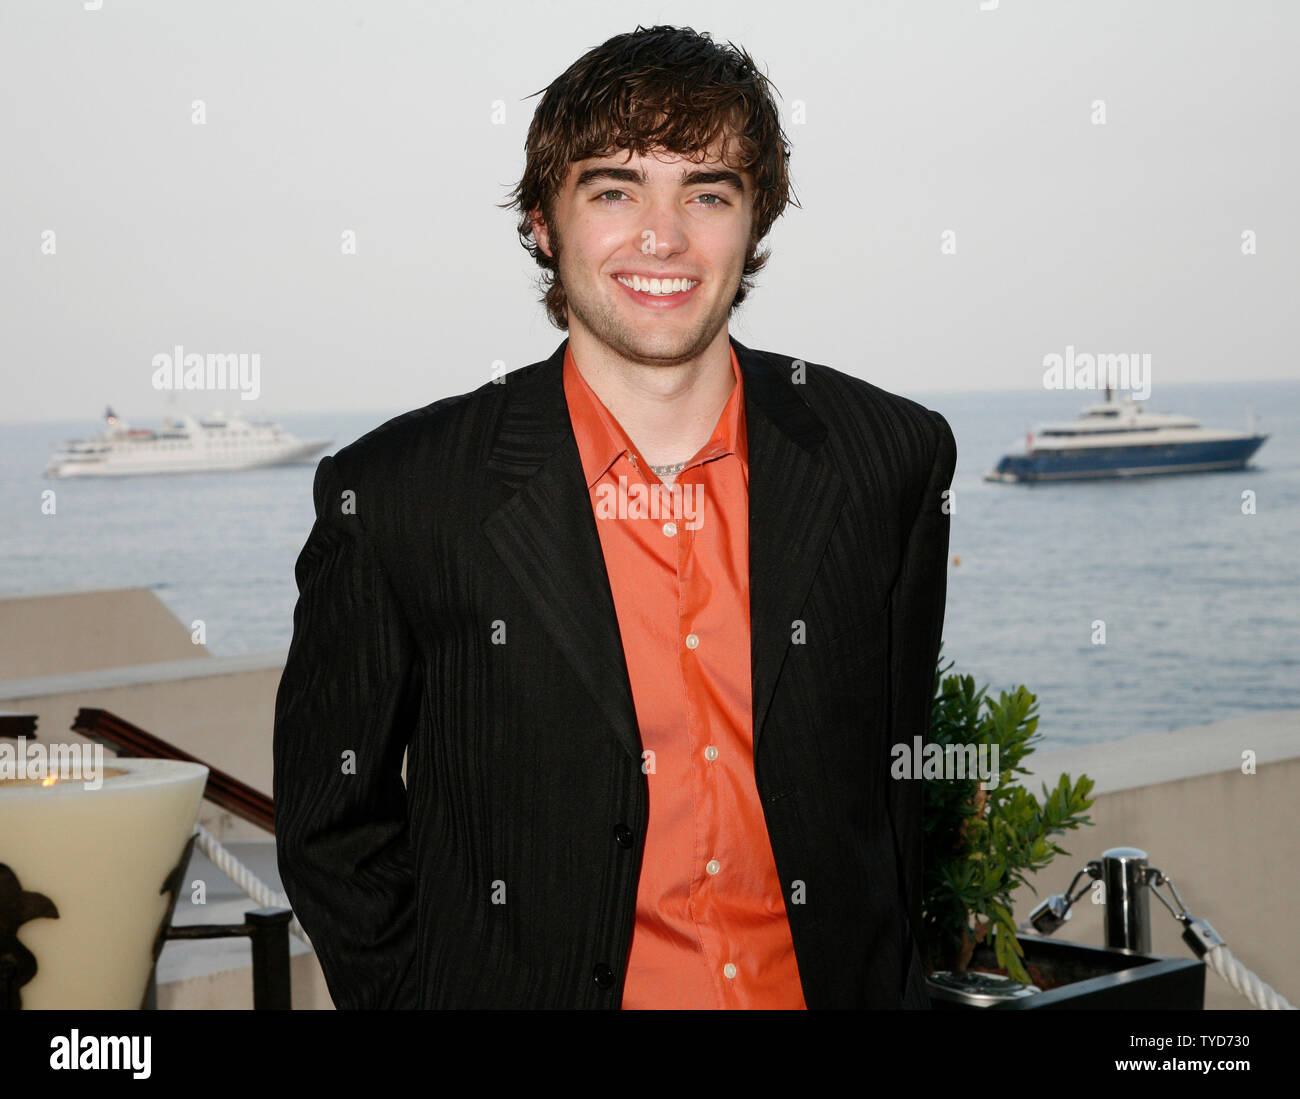 Actor Drew Tyler Bell of the TV series 'The Bold and the Beautiful' attends a Festival party during the 47th Monte Carlo Television Festival in Monte Carlo, Monaco on June 11, 2007.  (UPI Photo/David Silpa) Stock Photo